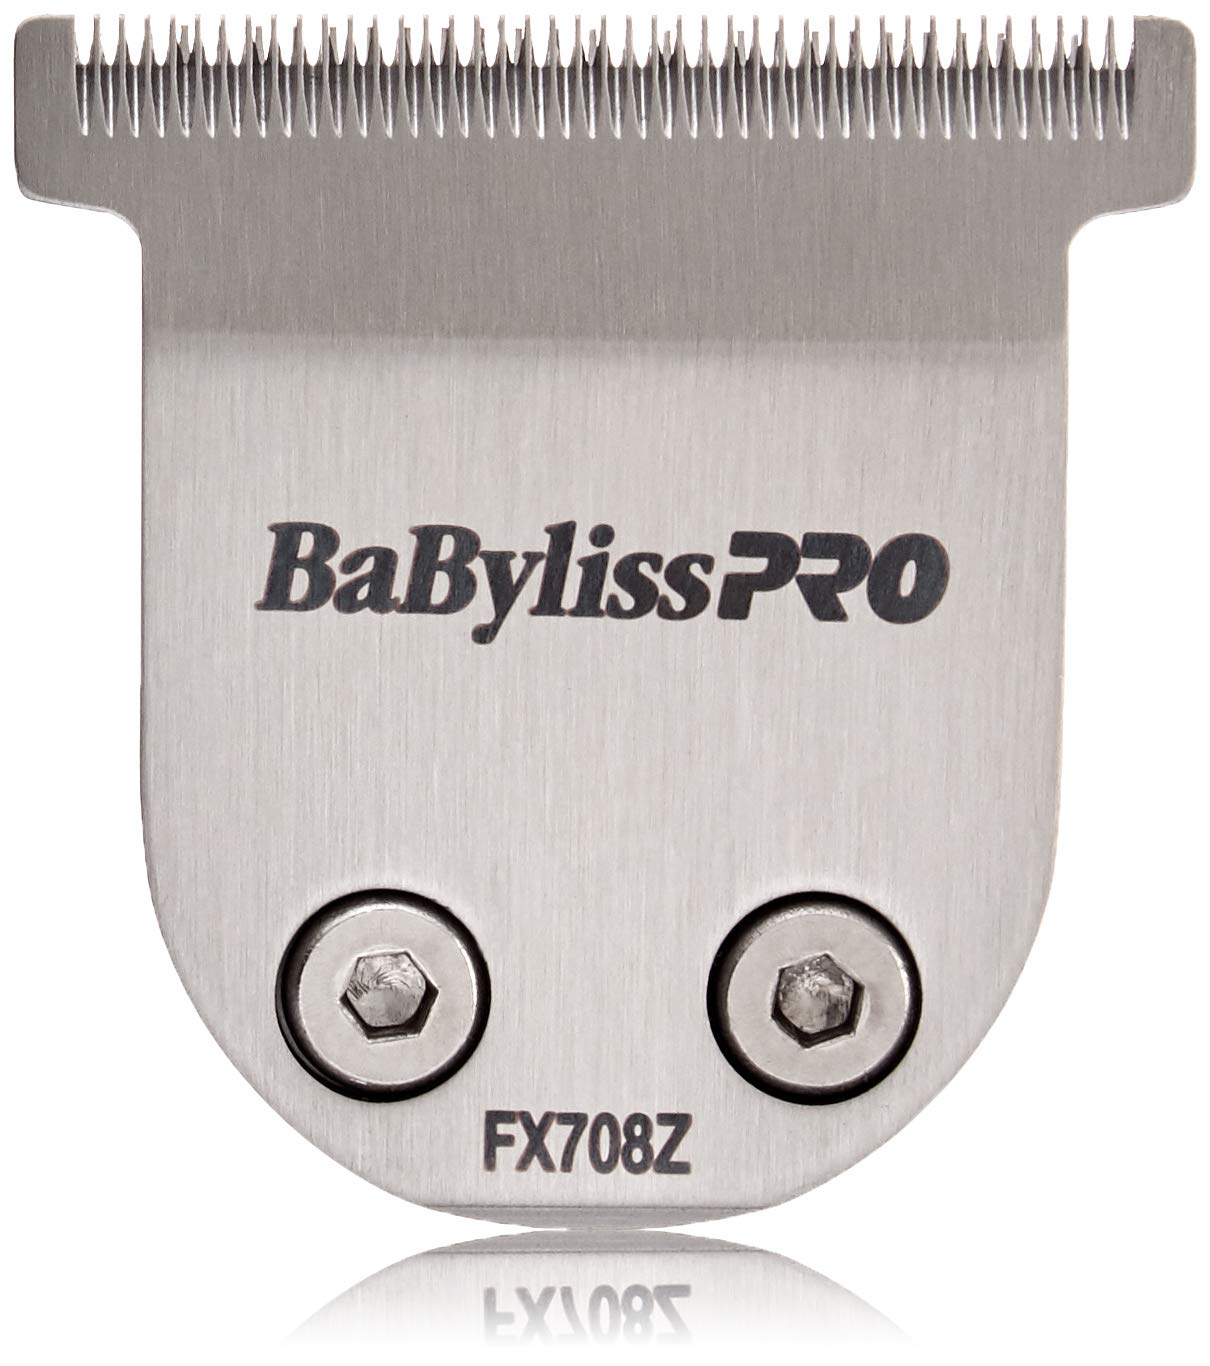 BaBylissPRO Barberology FX708Z Stainless Steel Replacement T-Blade for FX788RG and FX788S